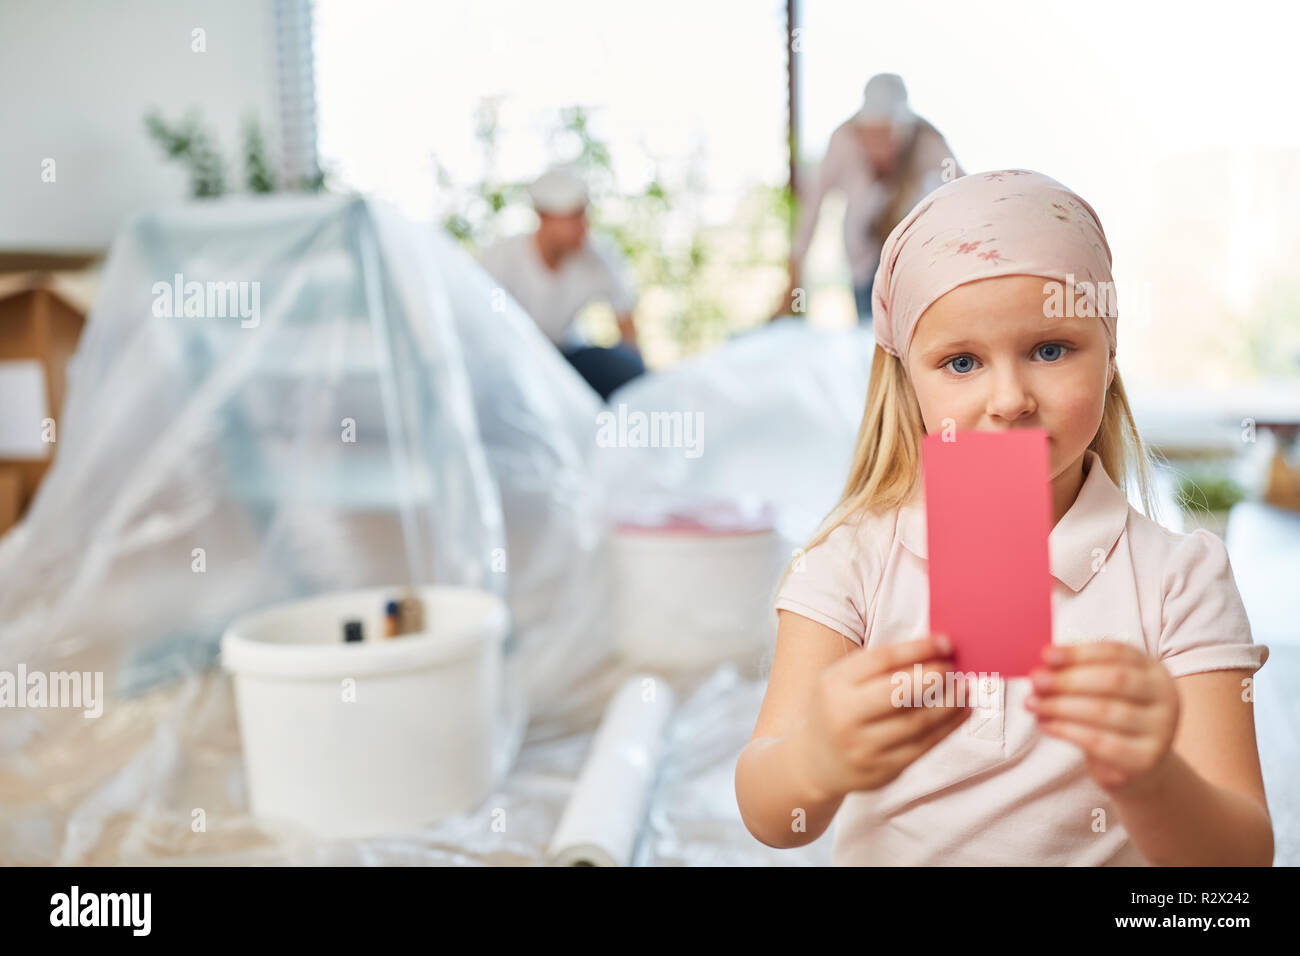 Girl renovating decides on pink wall paint in the room Stock Photo